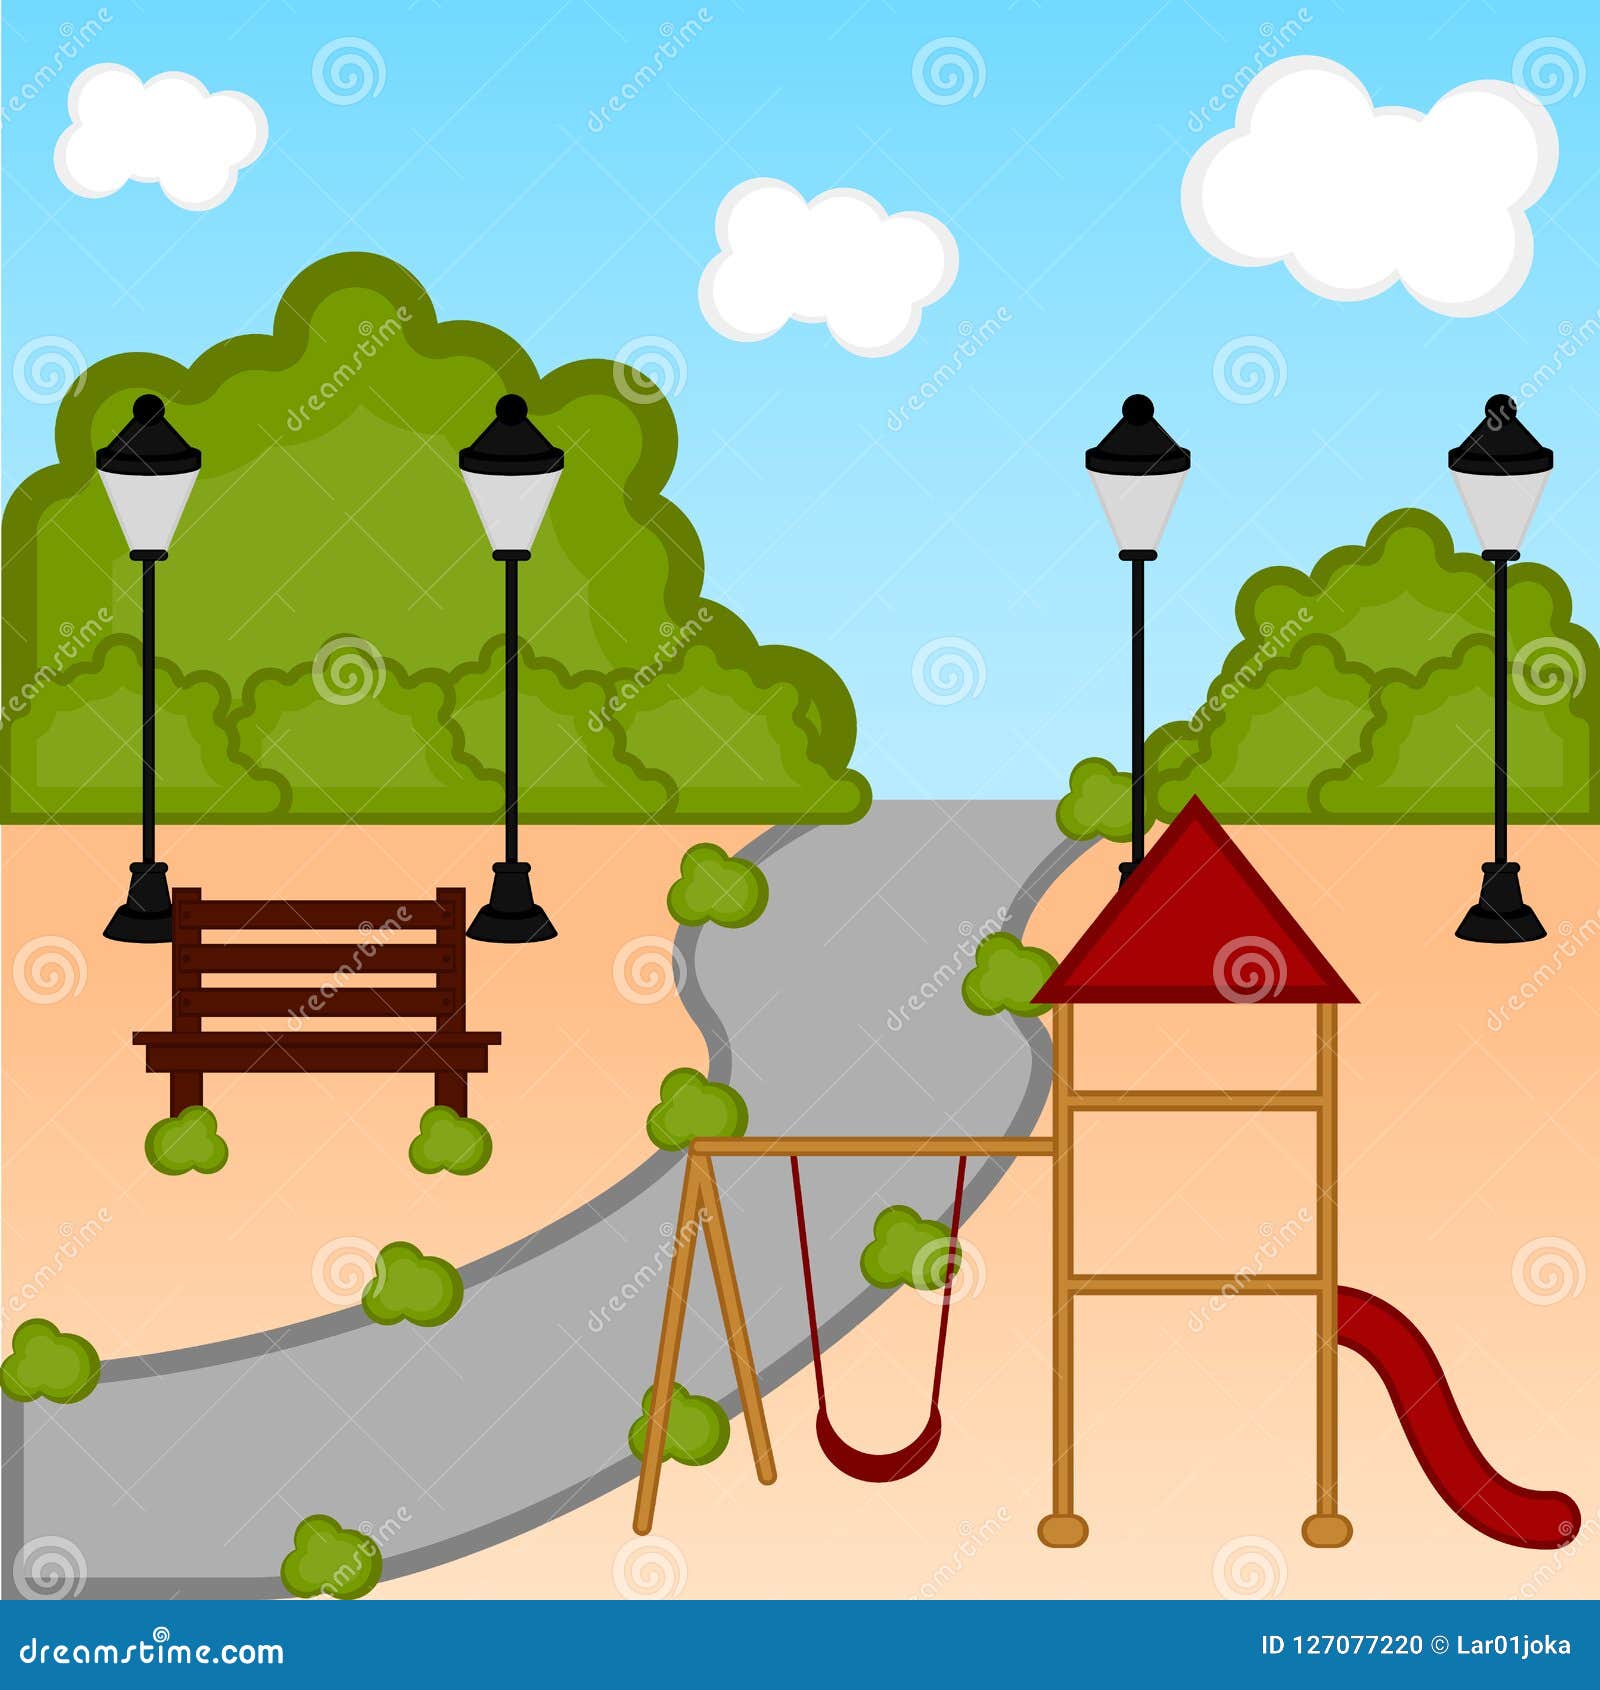 View of a Playground with Slides Stock Vector - Illustration of bench ...